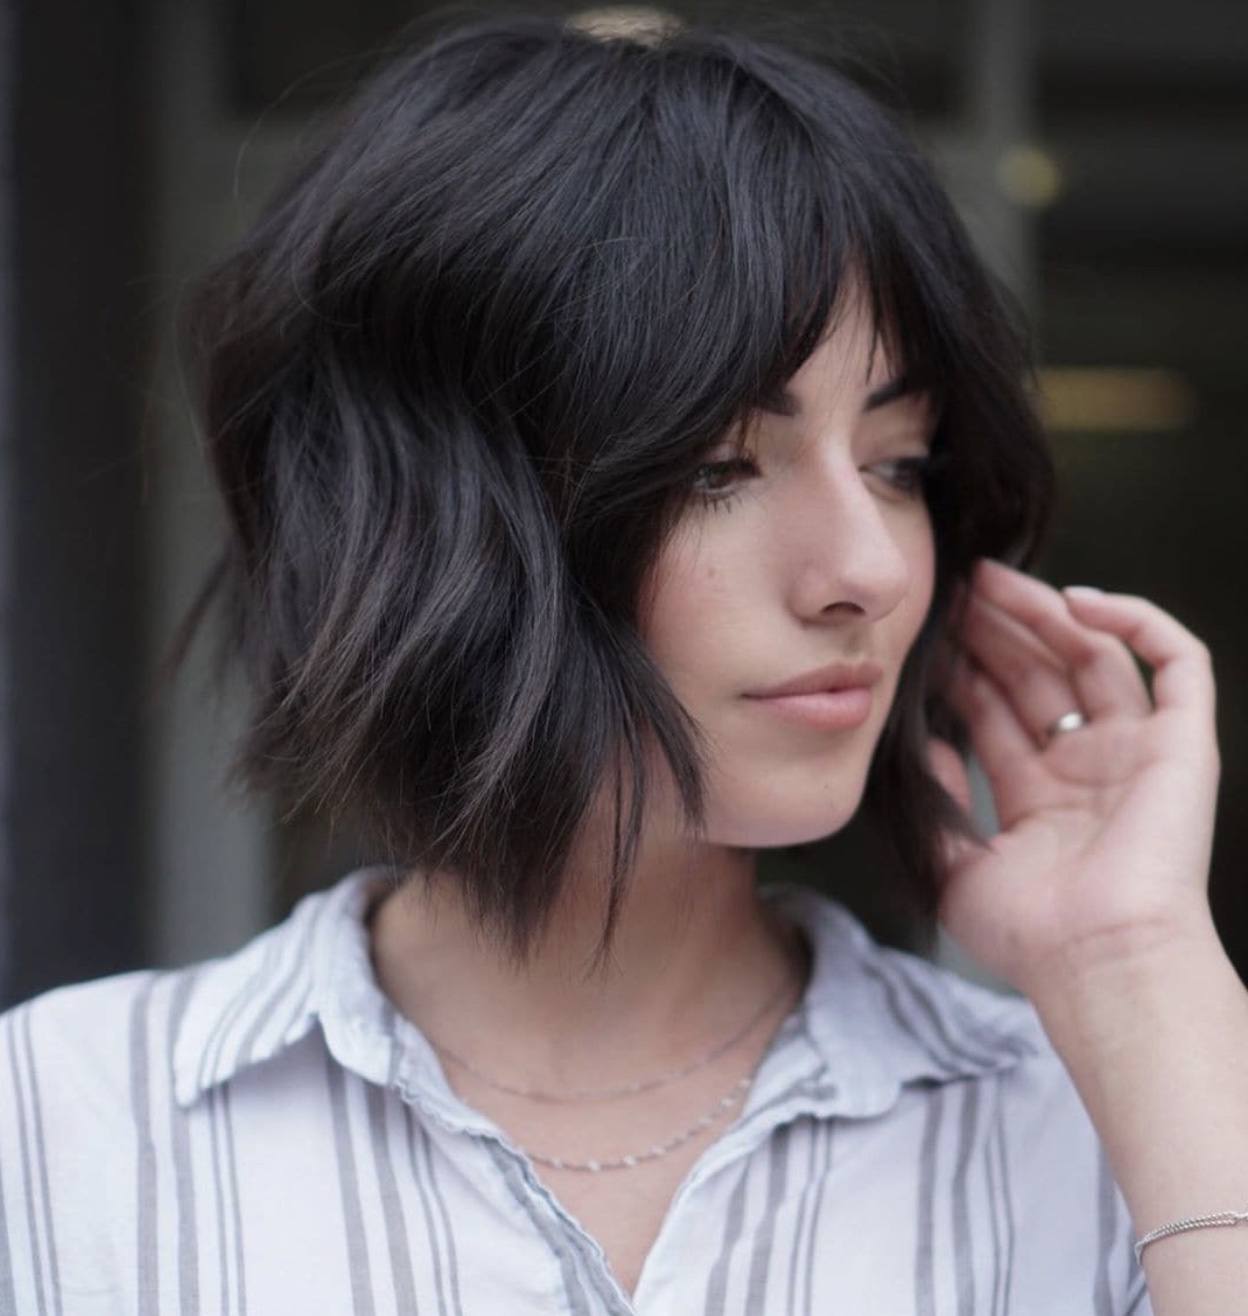 32 Blunt Cut Bobs That'll Inspire You to Make the Chop